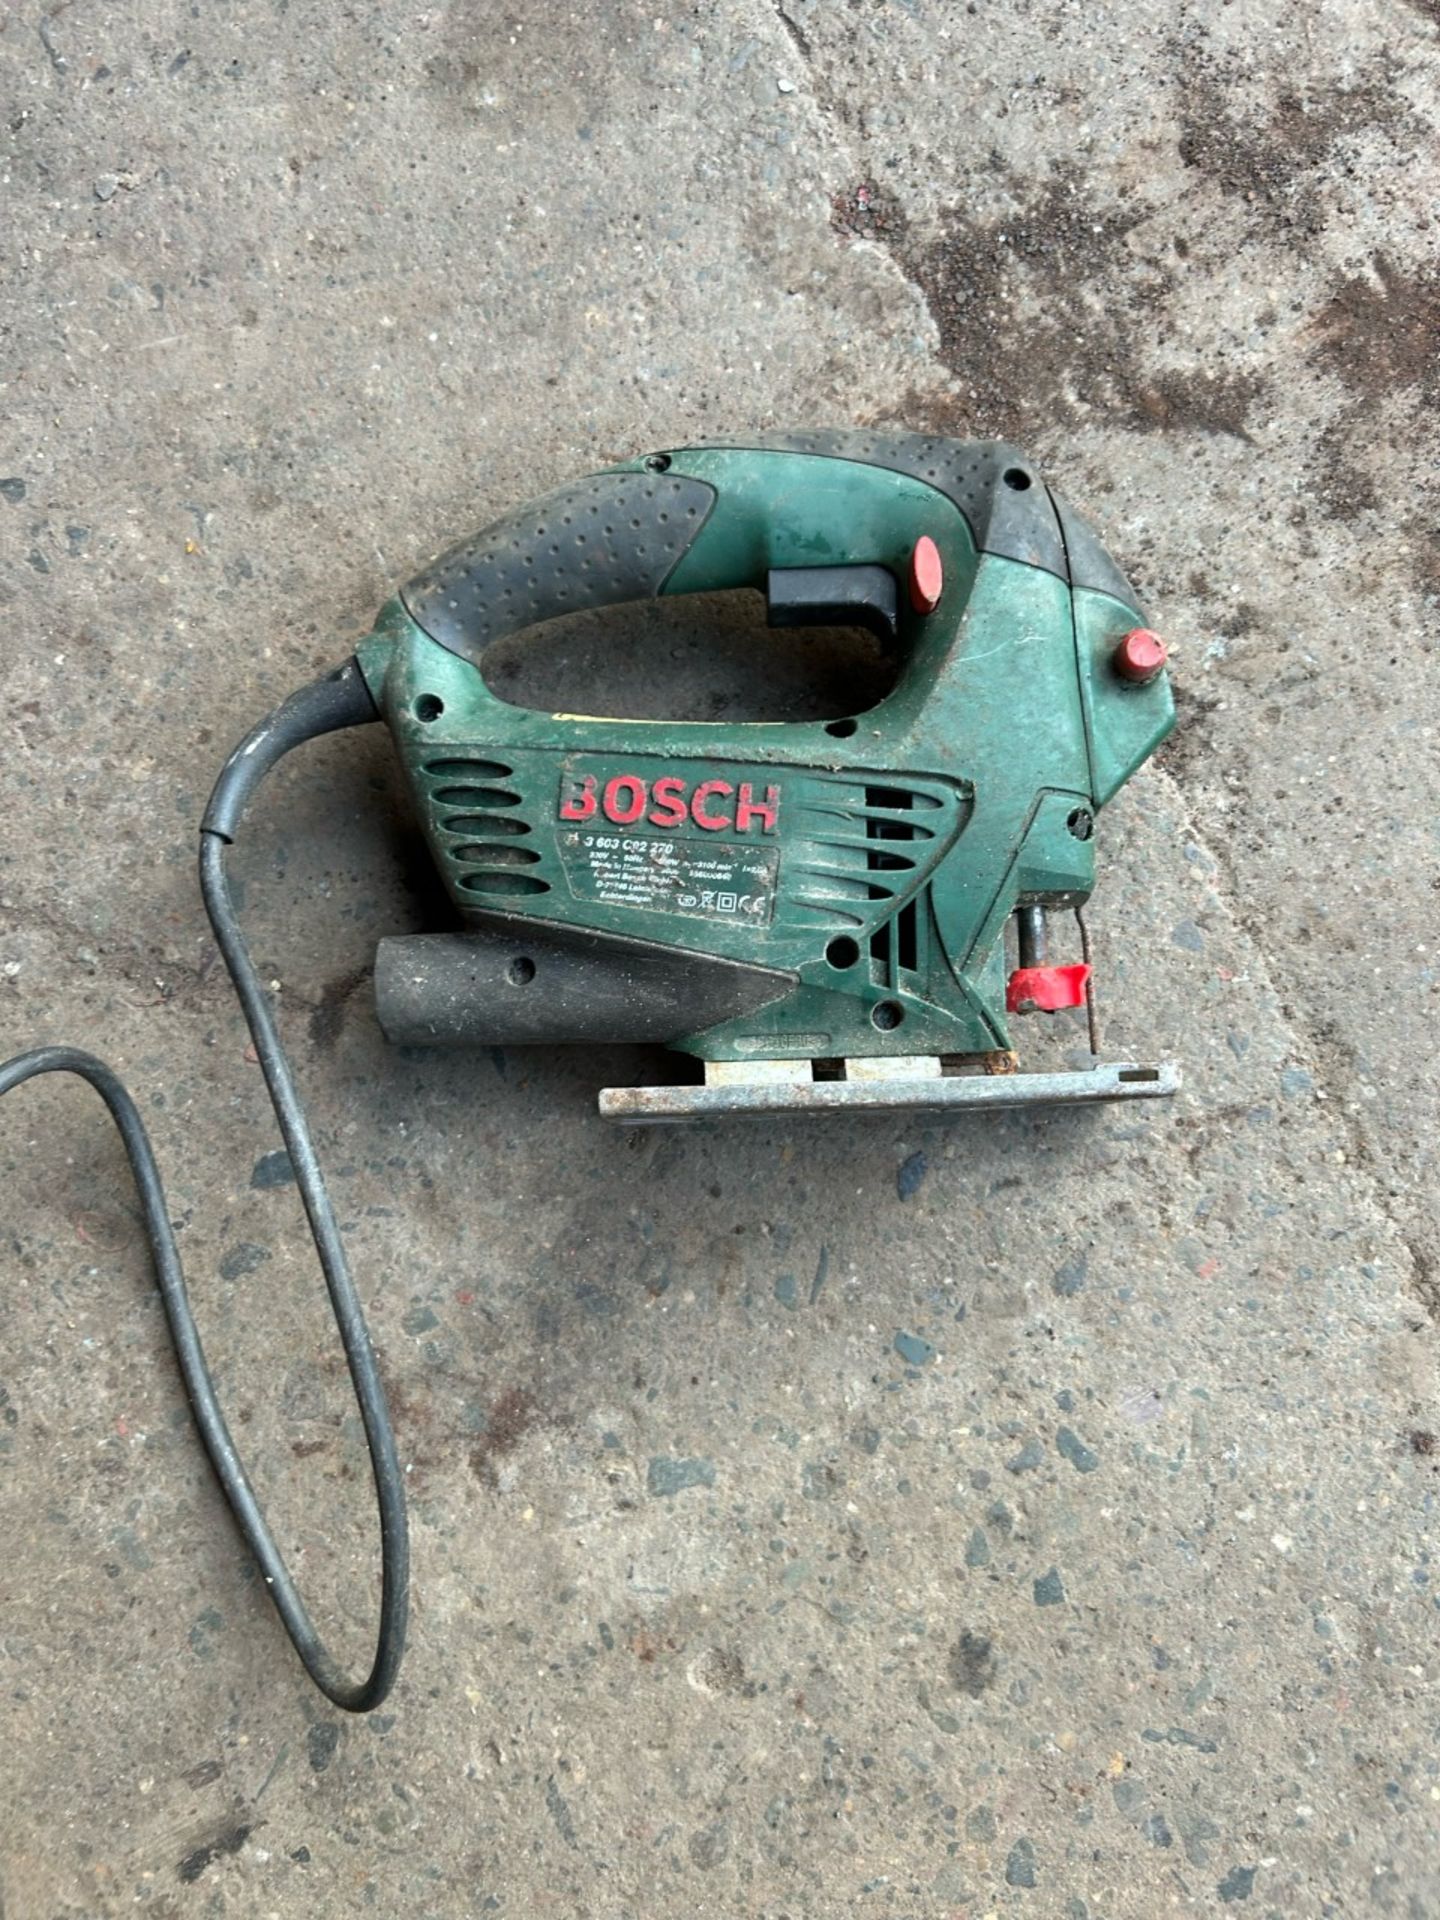 Used Bosch PST650L 240v jigsaw. Full working order as seen in video